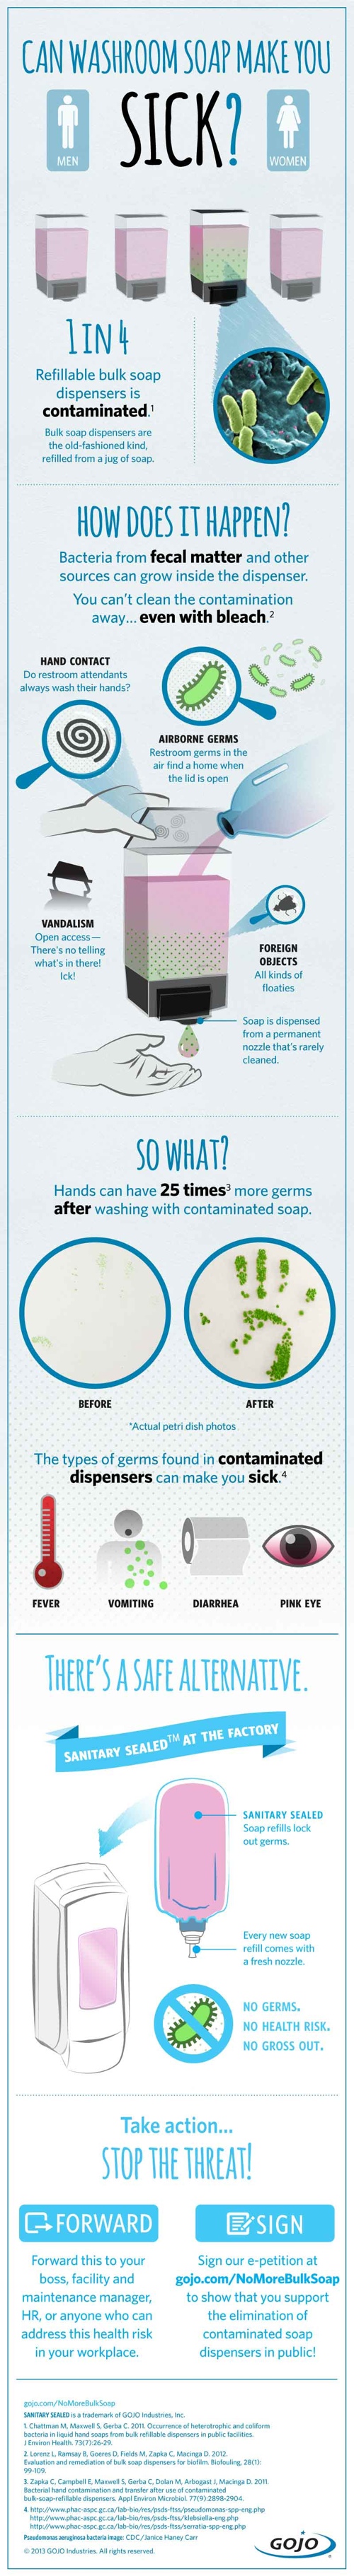 Can Washroom Soap Can Make You Sick? infographic